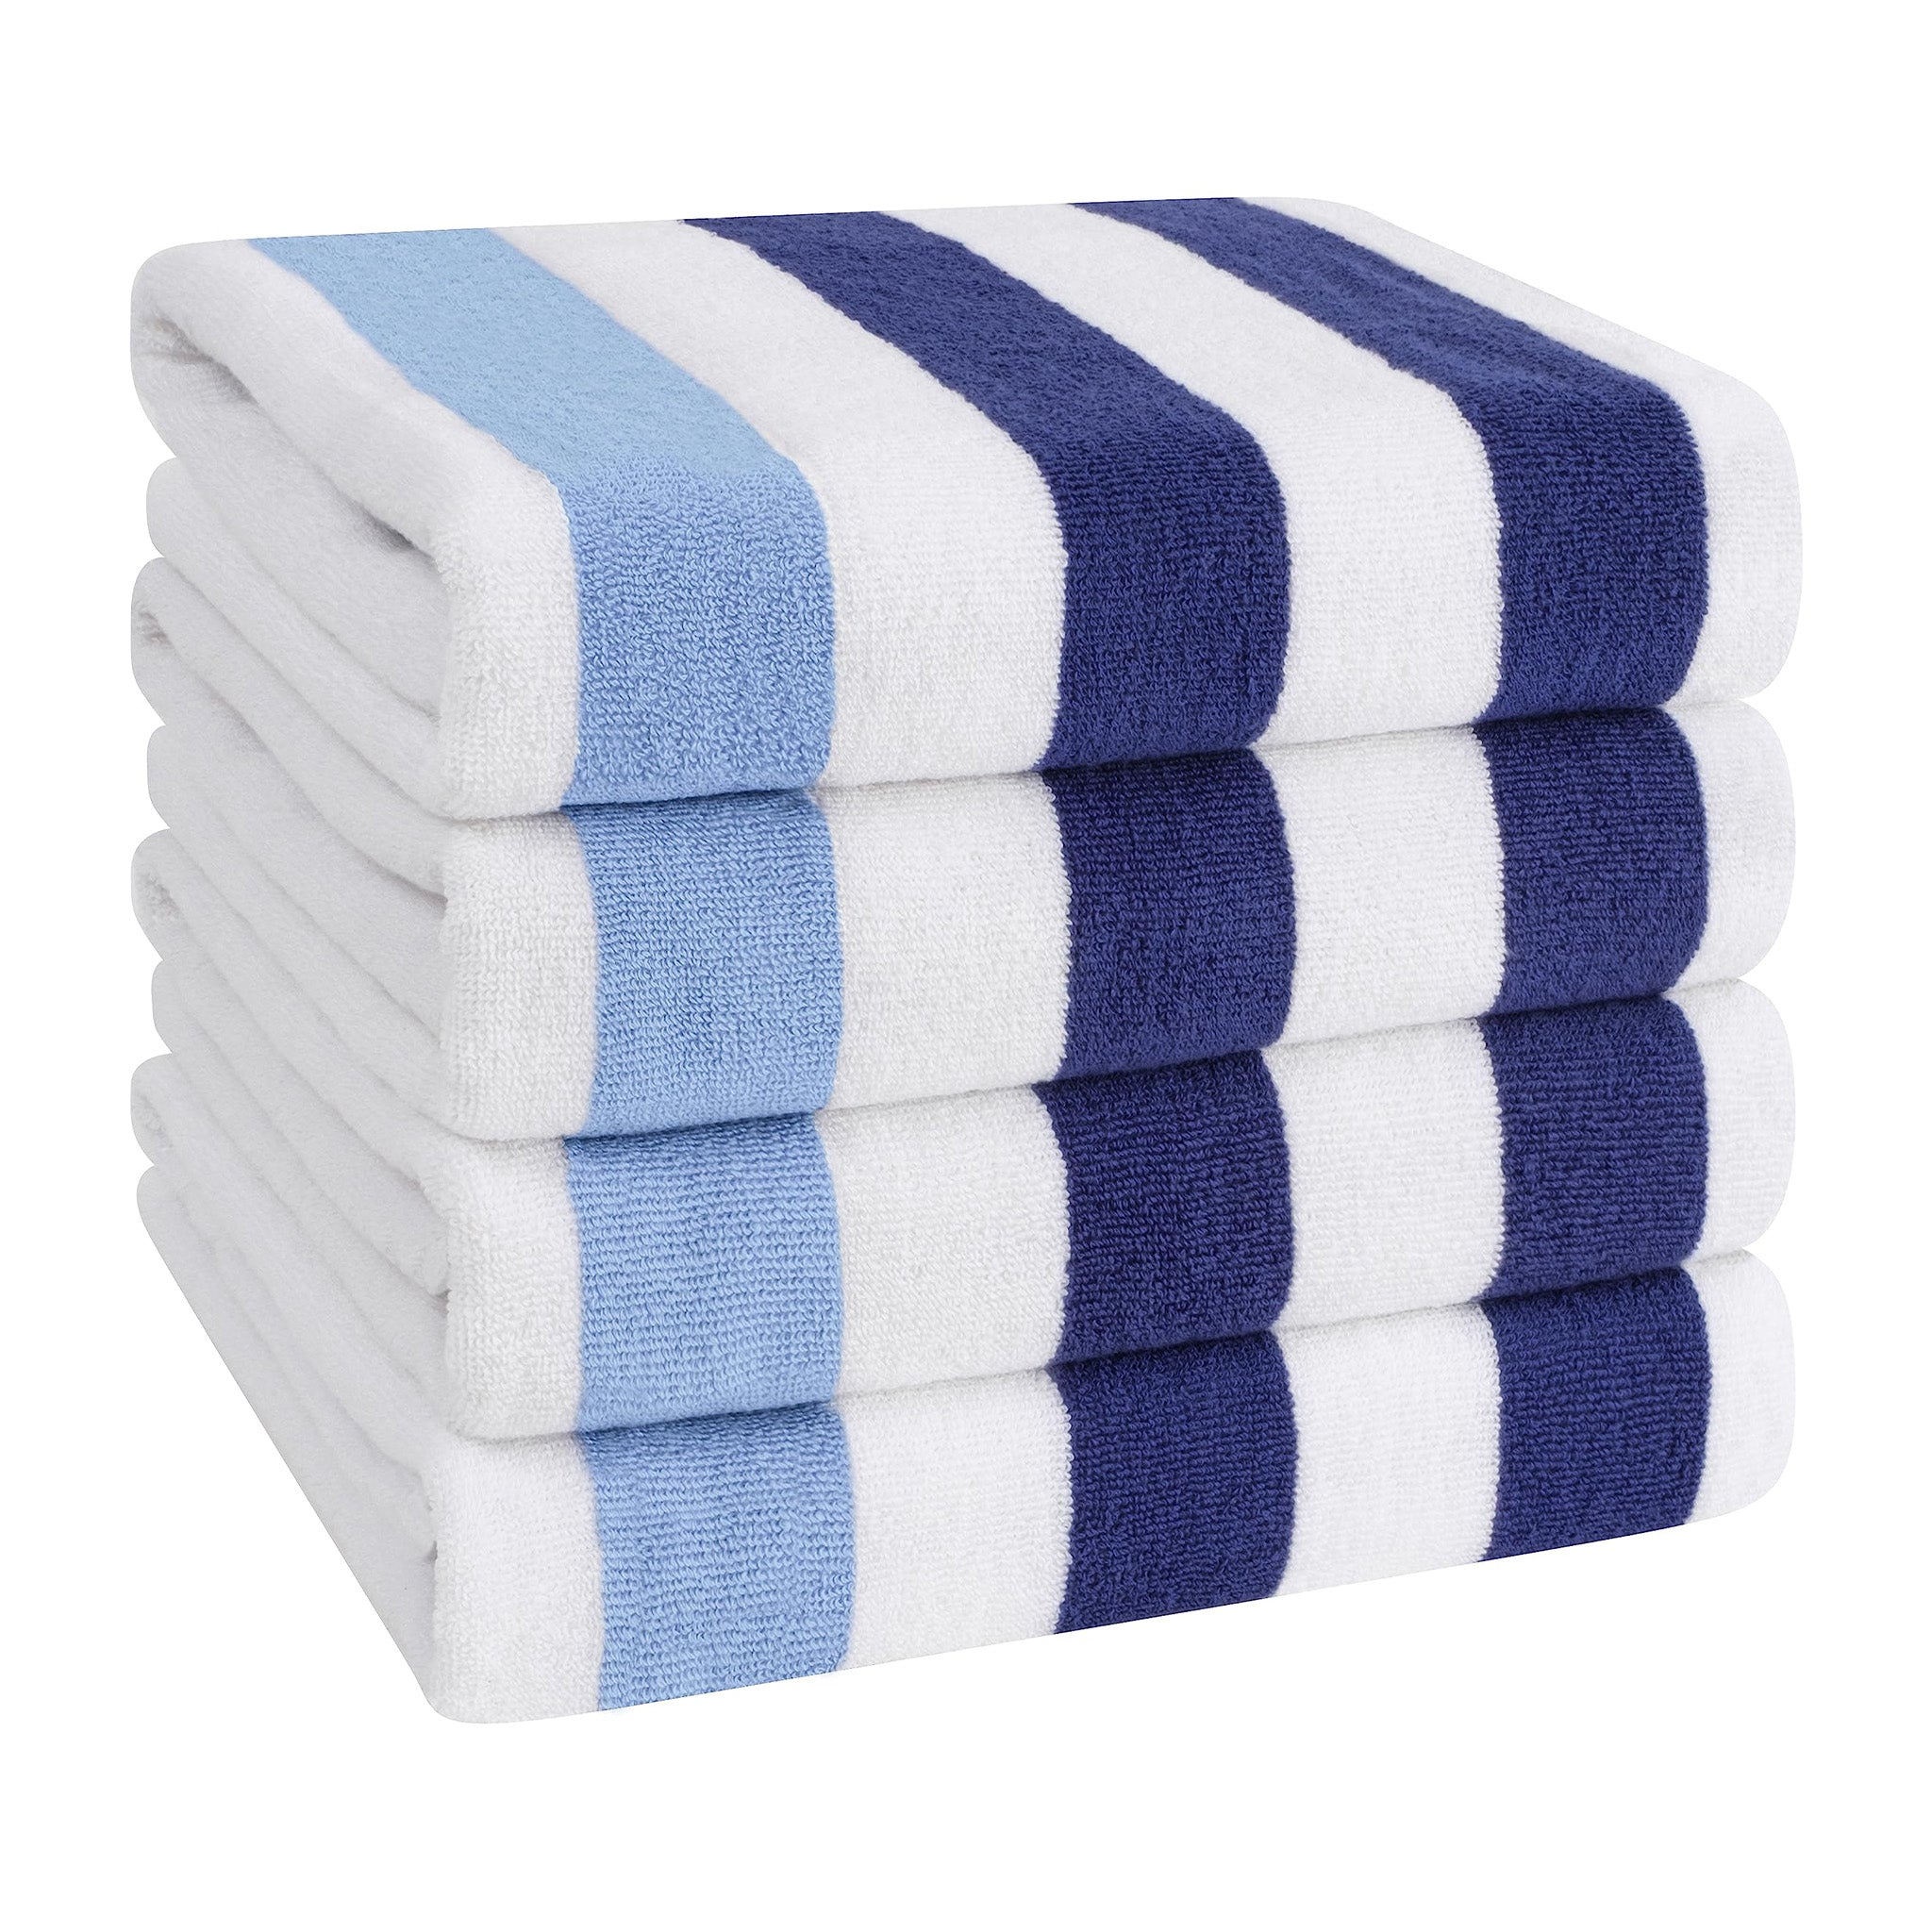 American Soft Linen 100% Cotton 4 Pack Beach Towels Cabana Striped Pool Towels -navy-sky-1